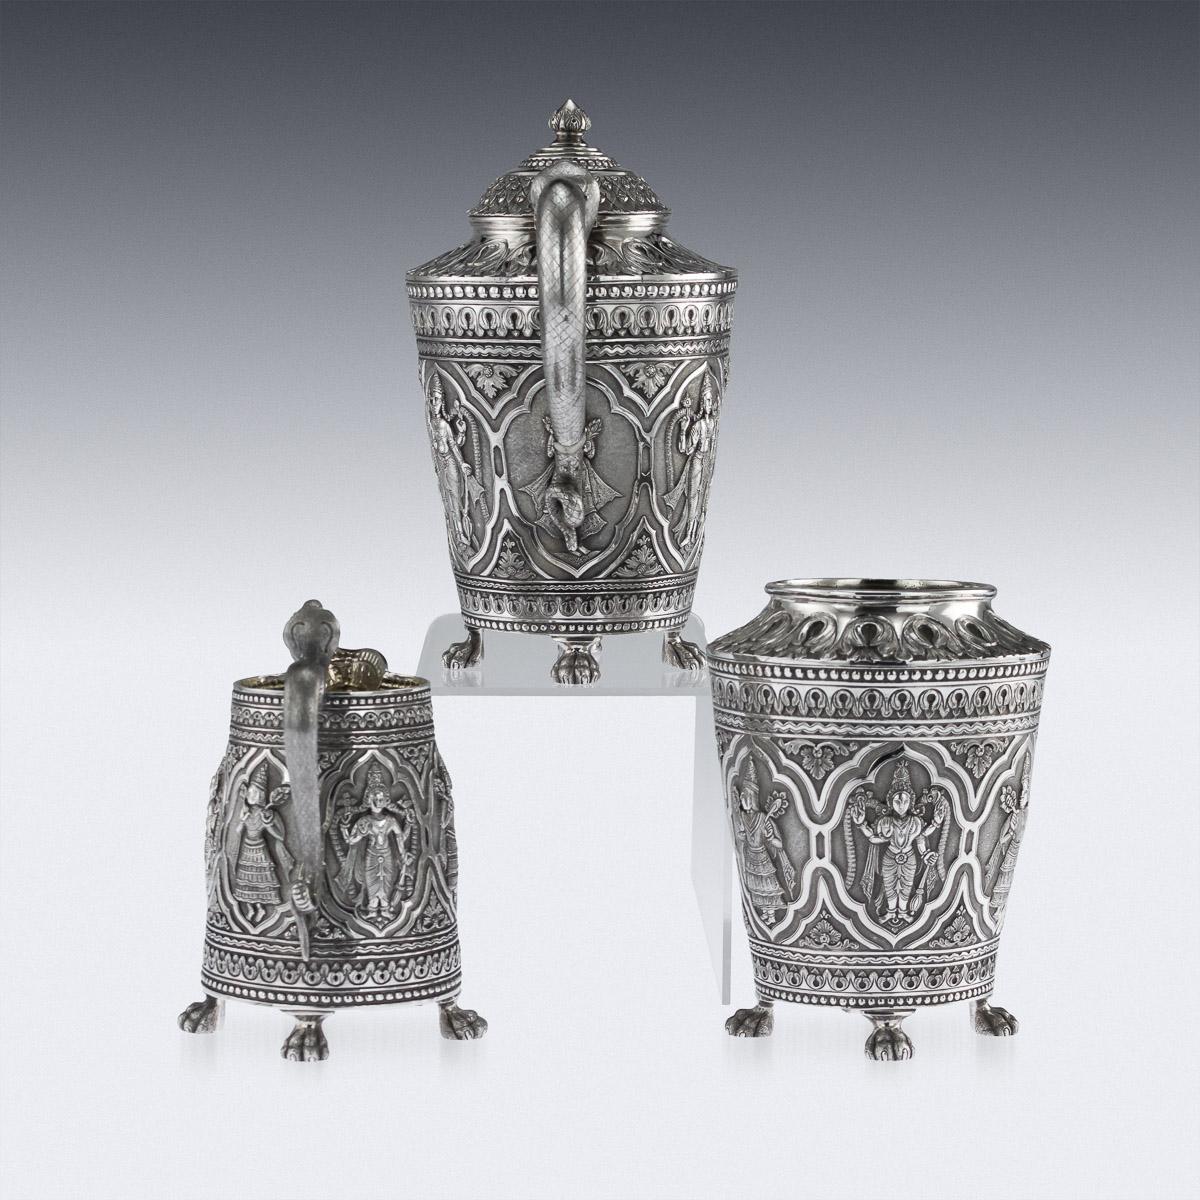 Antique 19th century Indian solid silver tea set, comprising of teapot, sugar bowl and cream jug. Stunning three-piece tea set decorated with stylised Indian deities in oval cartouche reserves, surrounded with Madras style leaf boarders, bead